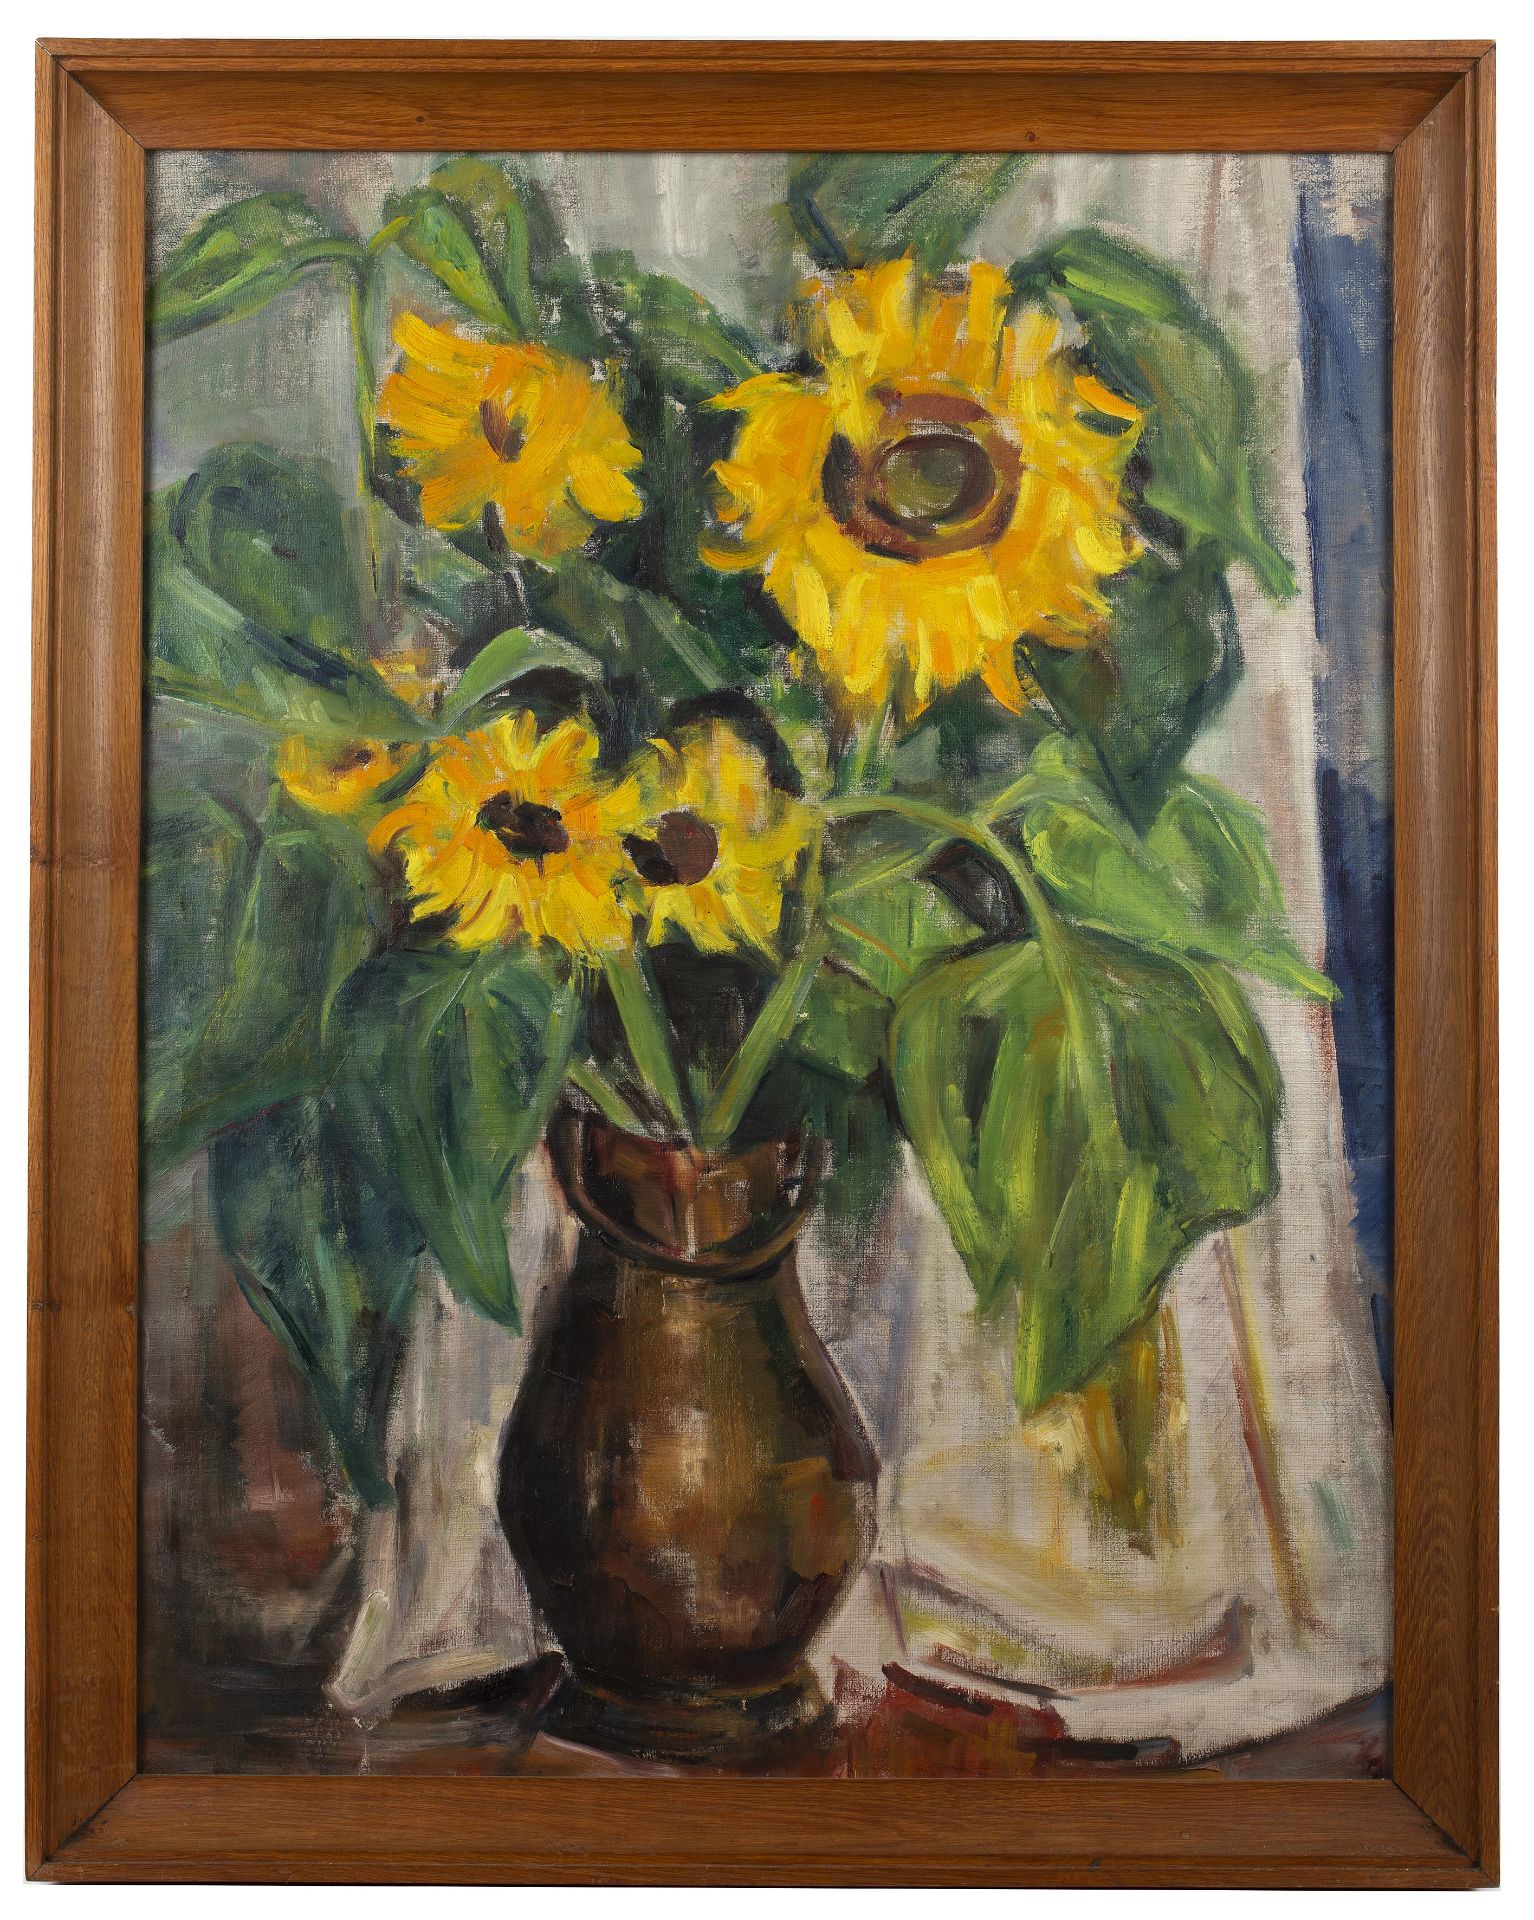 20th Century School 'Still life of sunflowers in a copper jug', oil on canvas, unsigned, 92cm x 71cm - Image 2 of 3